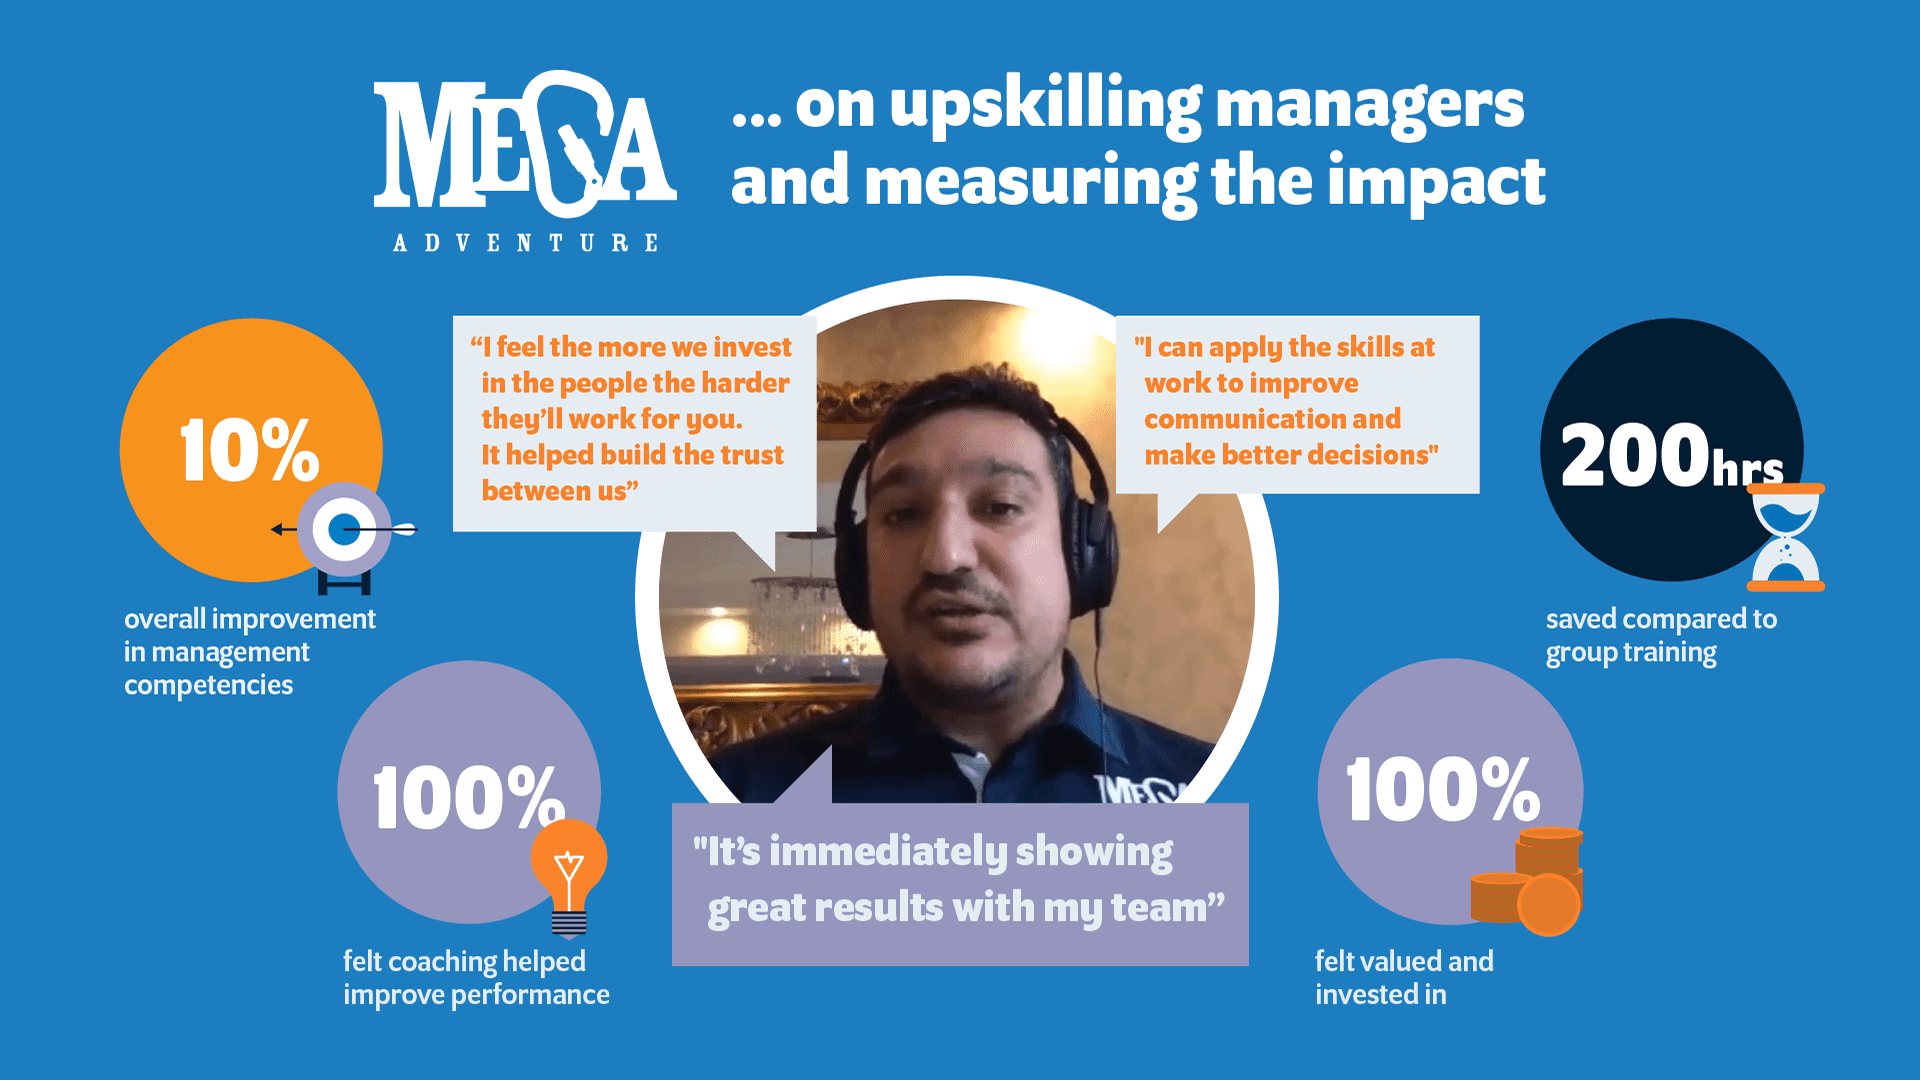 Mega on upskilling managers and measuring the impact